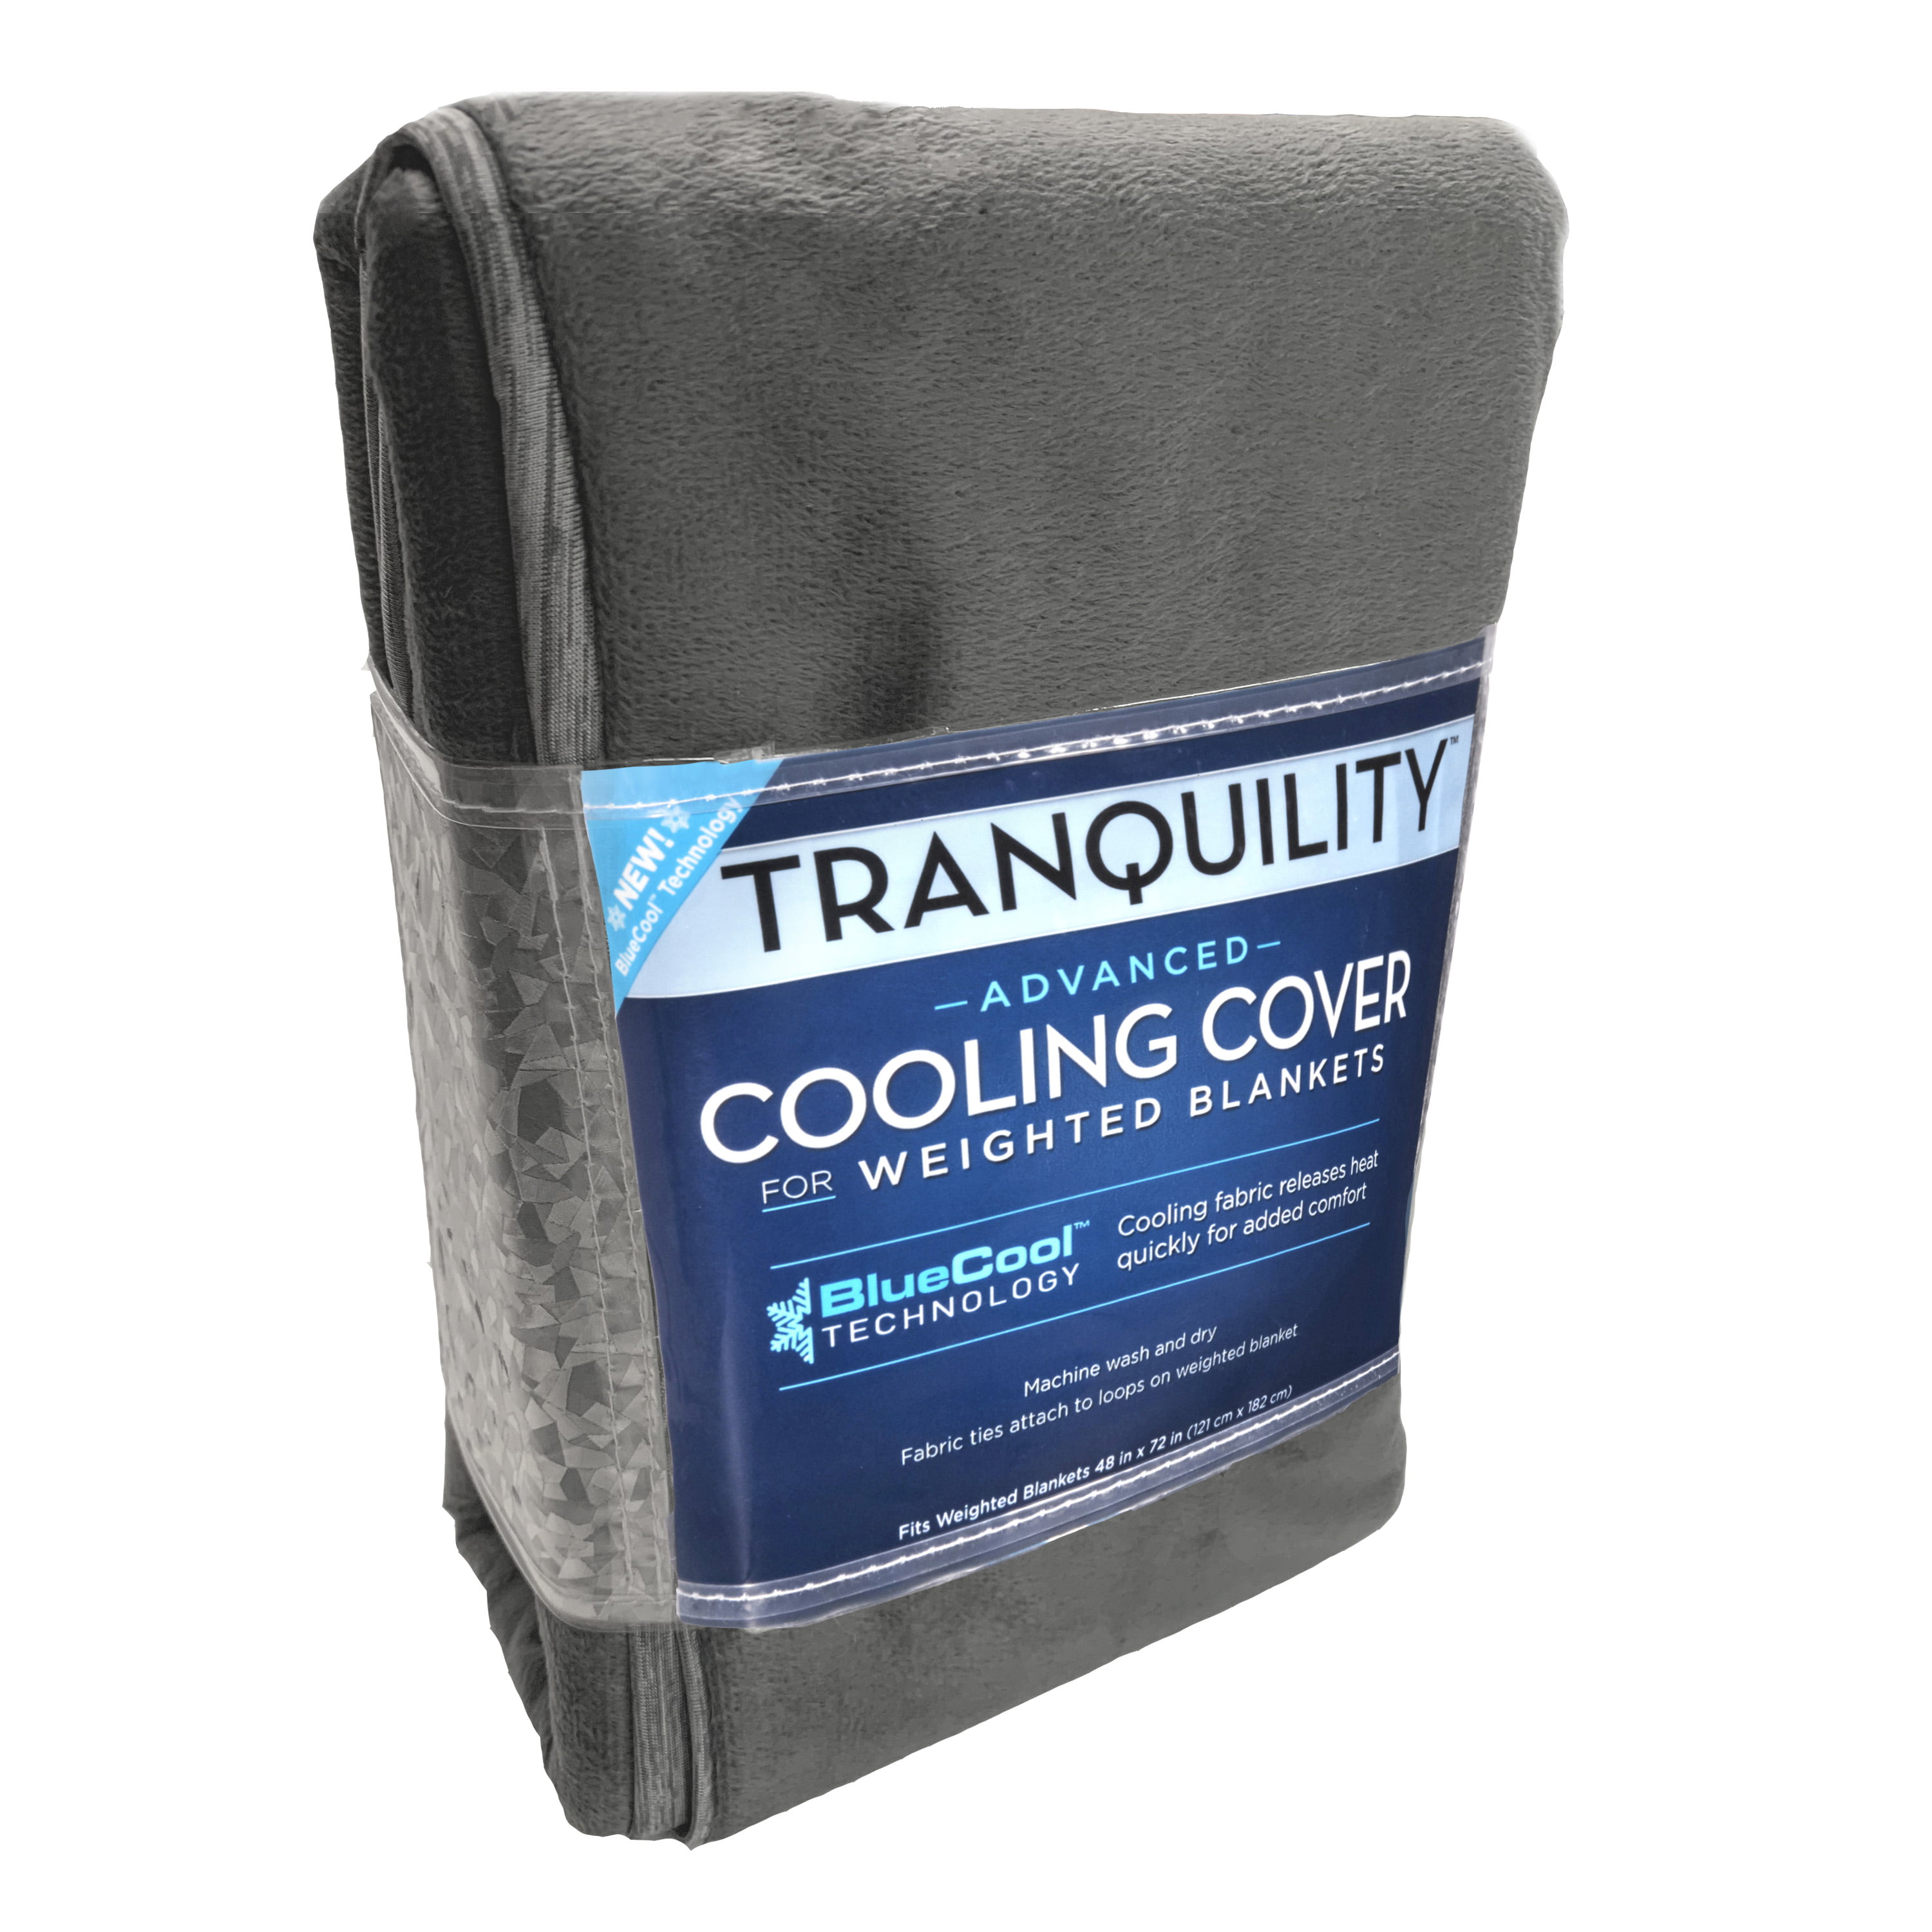 Tranquility Cooling Cover for Weighted Blanket, Grey - Walmart.com